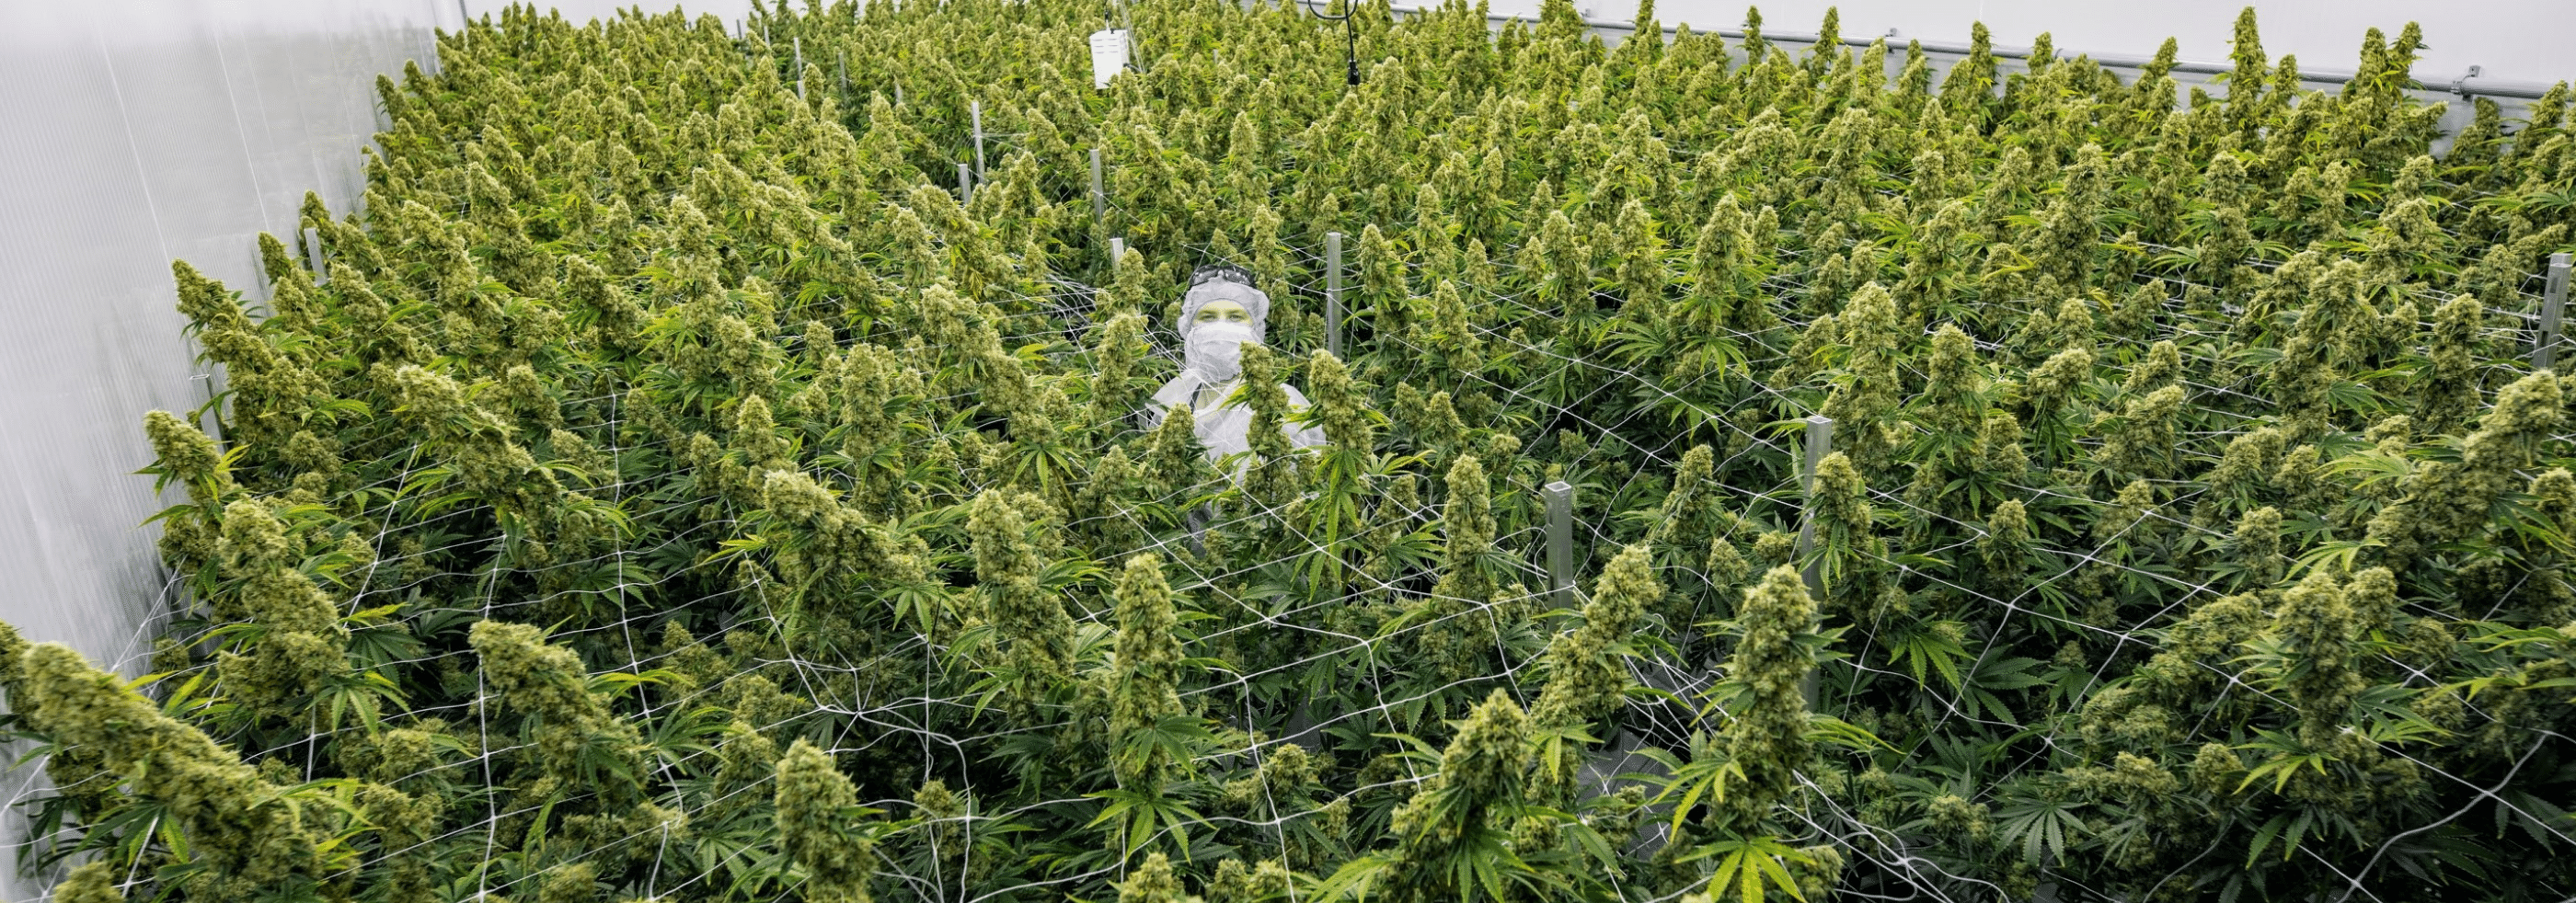 Origine Nature cannabis worker in their growing facility in Quebec Canada